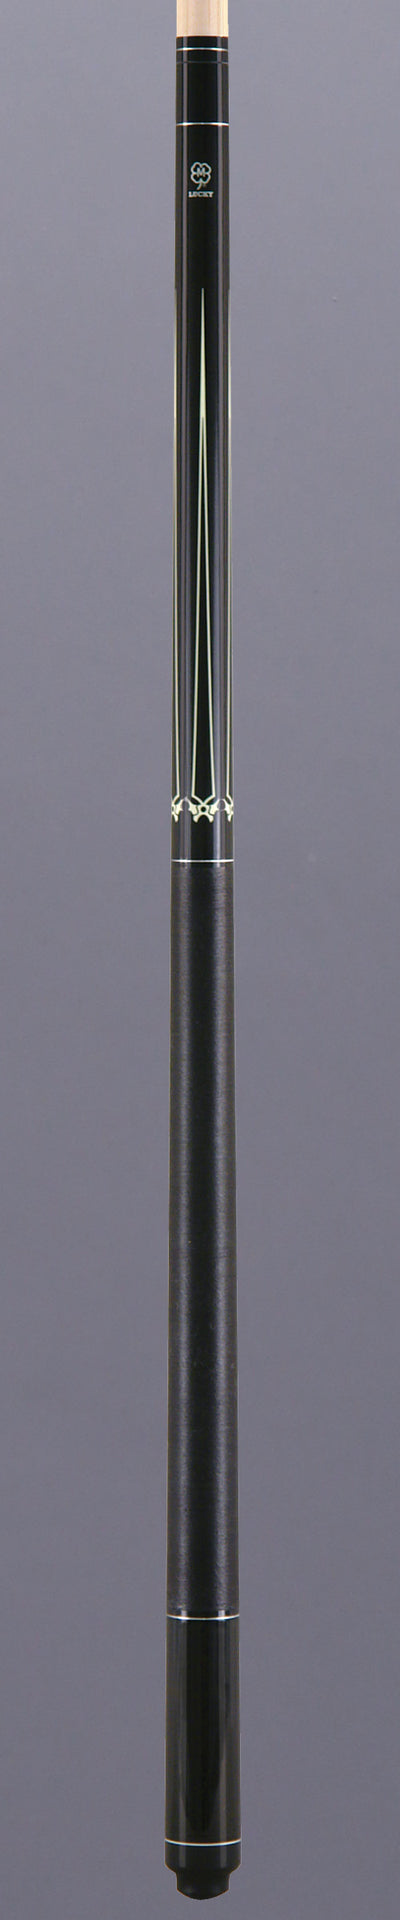 Lucky L16  Black 4 Point Cue